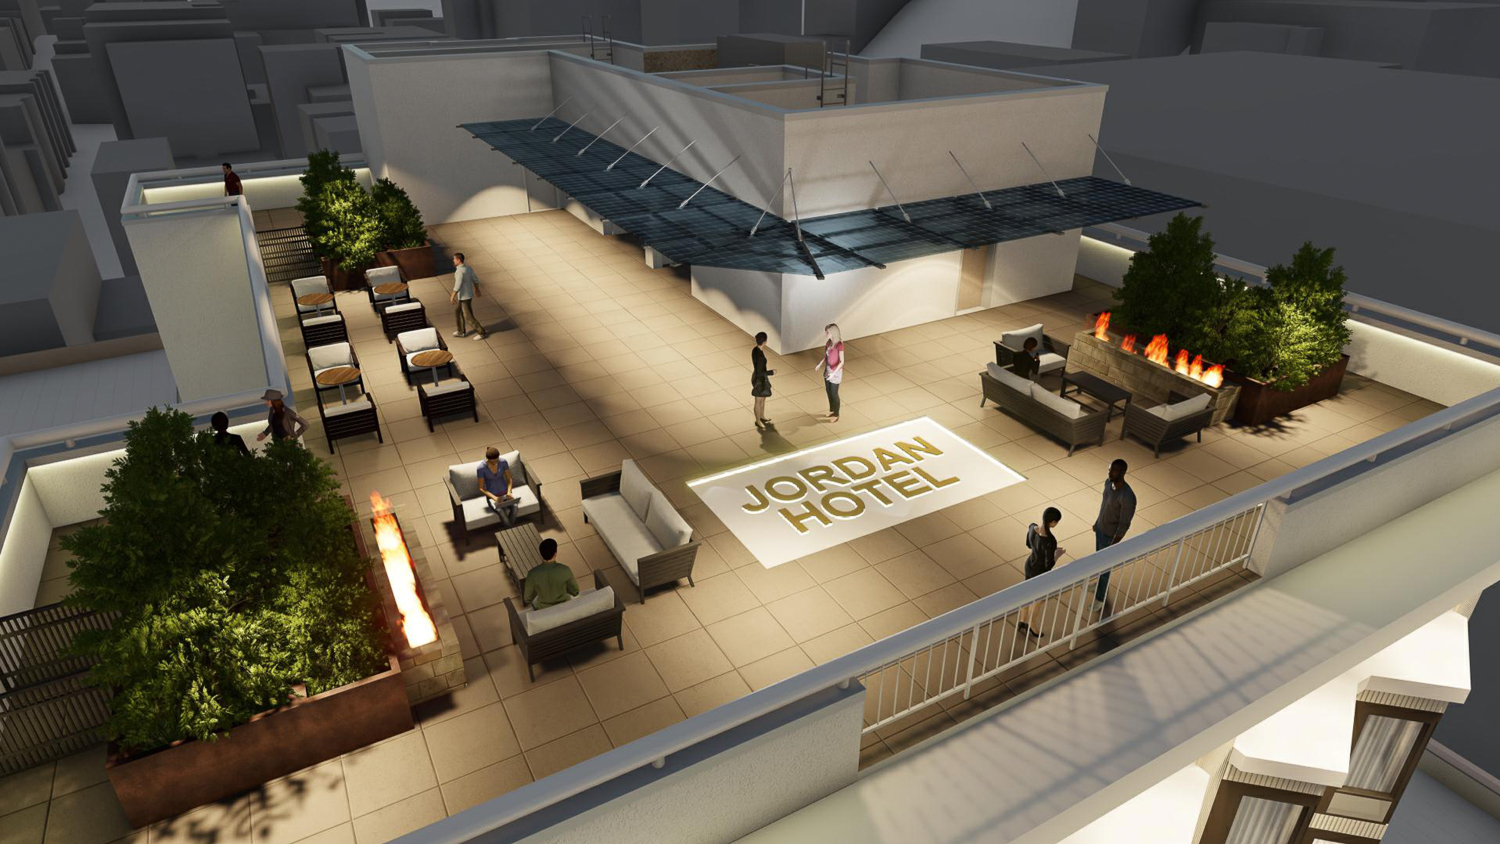 420 Sutter Street evening view of the rooftop deck, rendering by Stanton Architecture